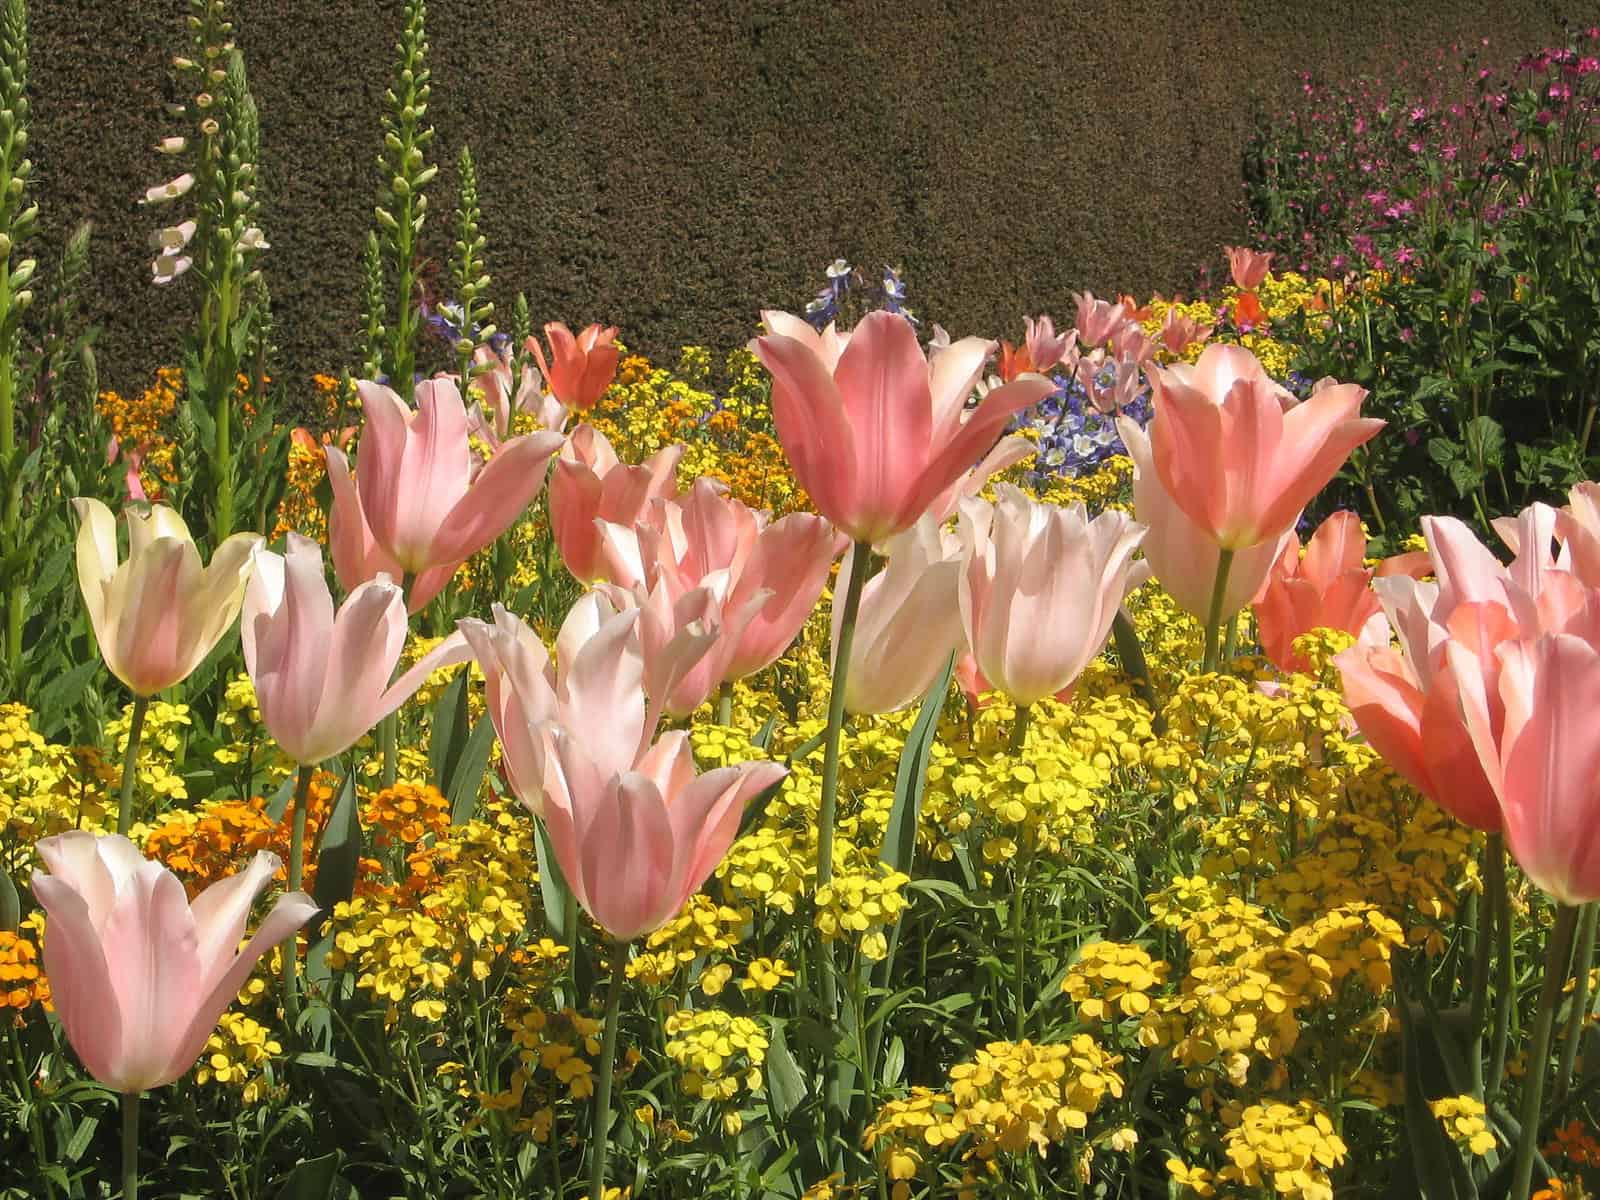 A bed of vibrant tulips, perfect for a cutting garden.